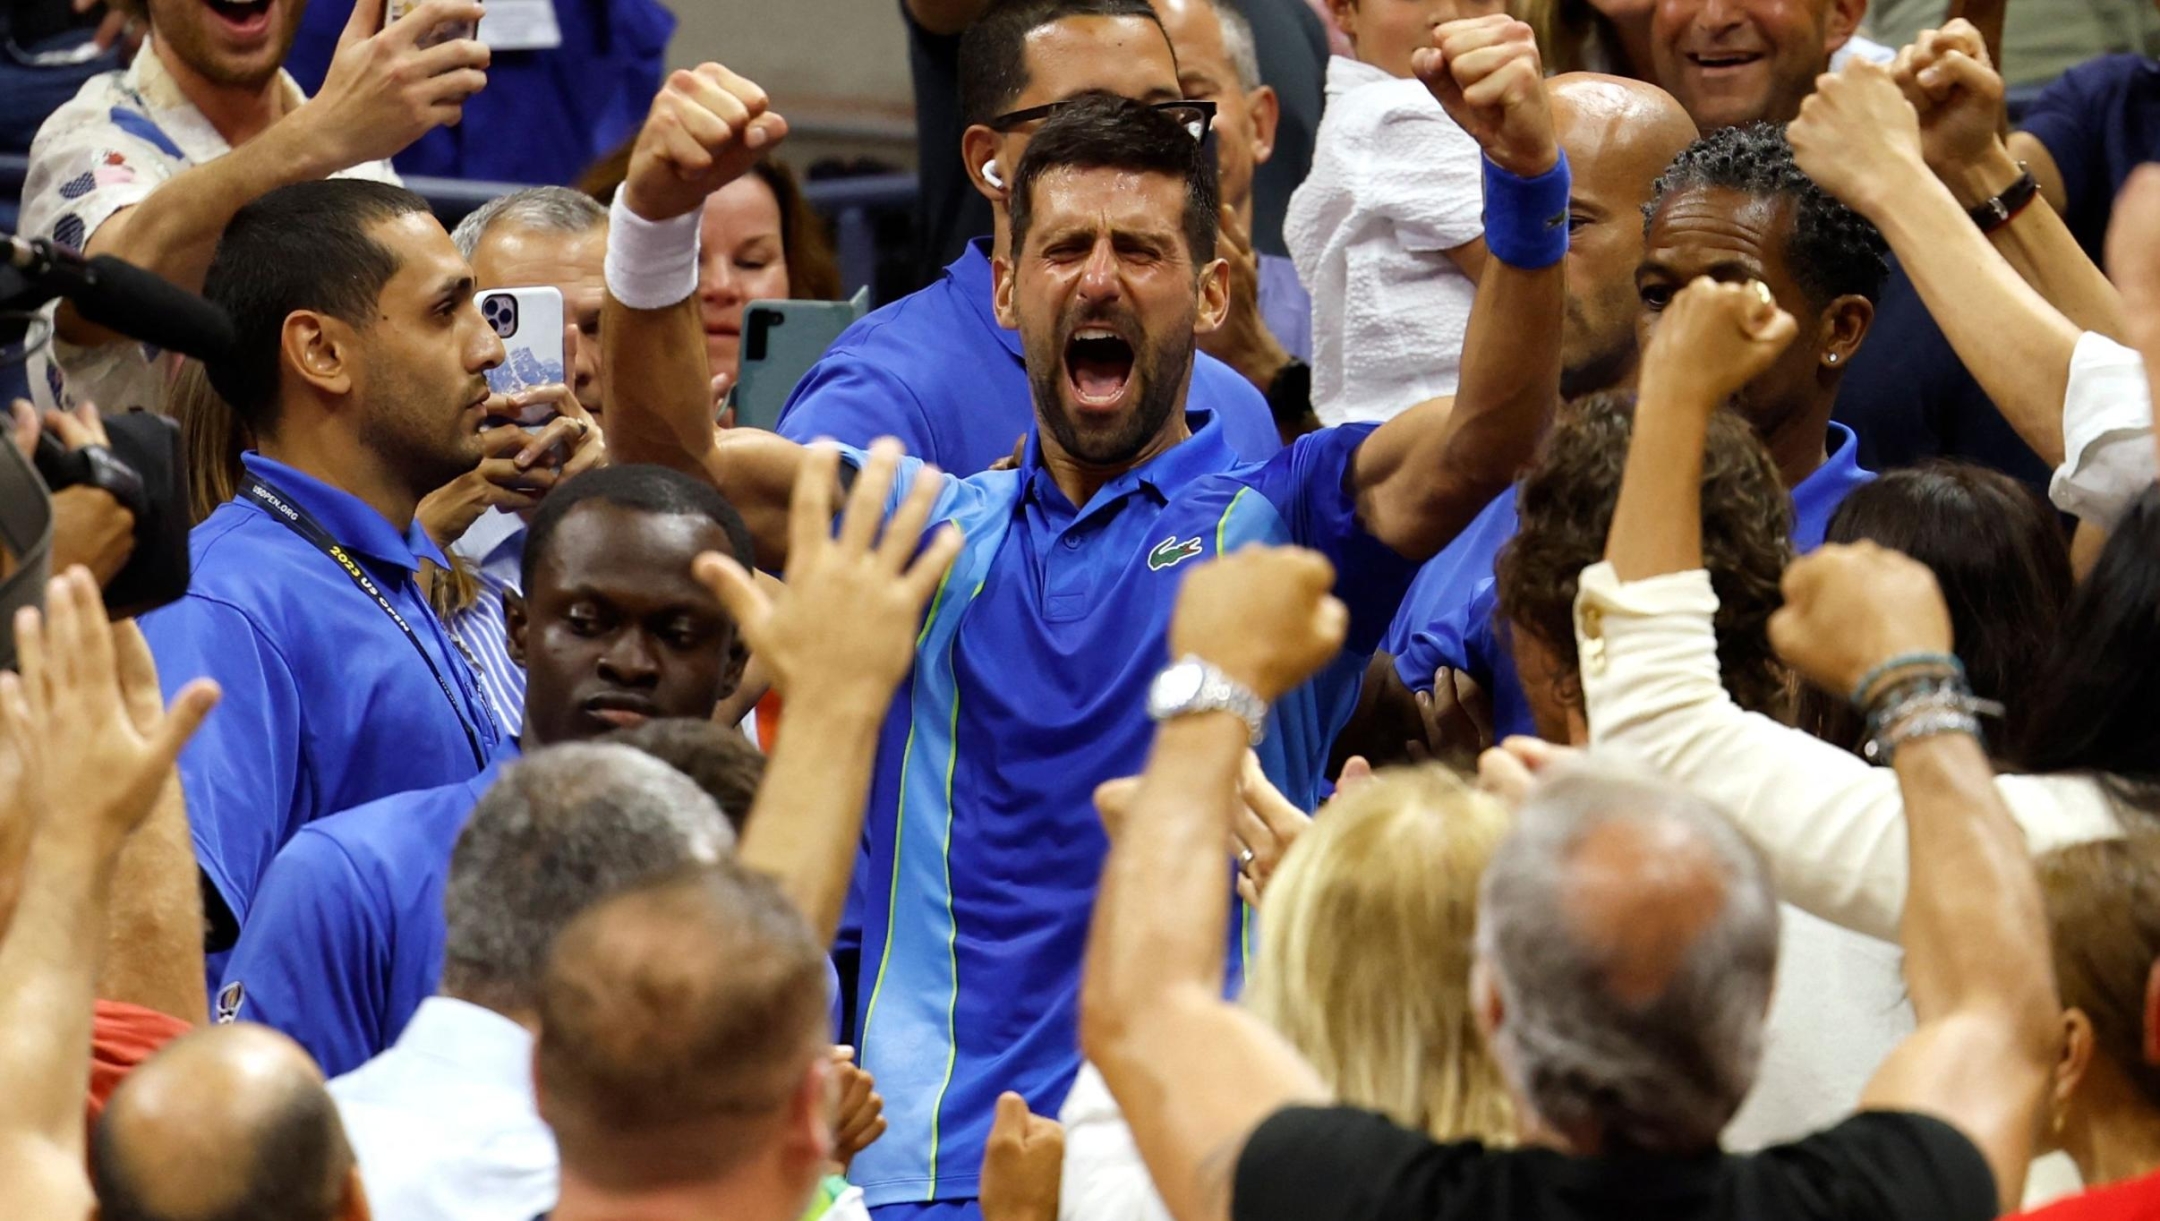 TOPSHOT - Serbia's Novak Djokovic celebrates with his team after defeating Russia's Daniil Medvedev during the US Open tennis tournament men's singles final match at the USTA Billie Jean King National Tennis Center in New York City, on September 10, 2023. (Photo by kena betancur / AFP)